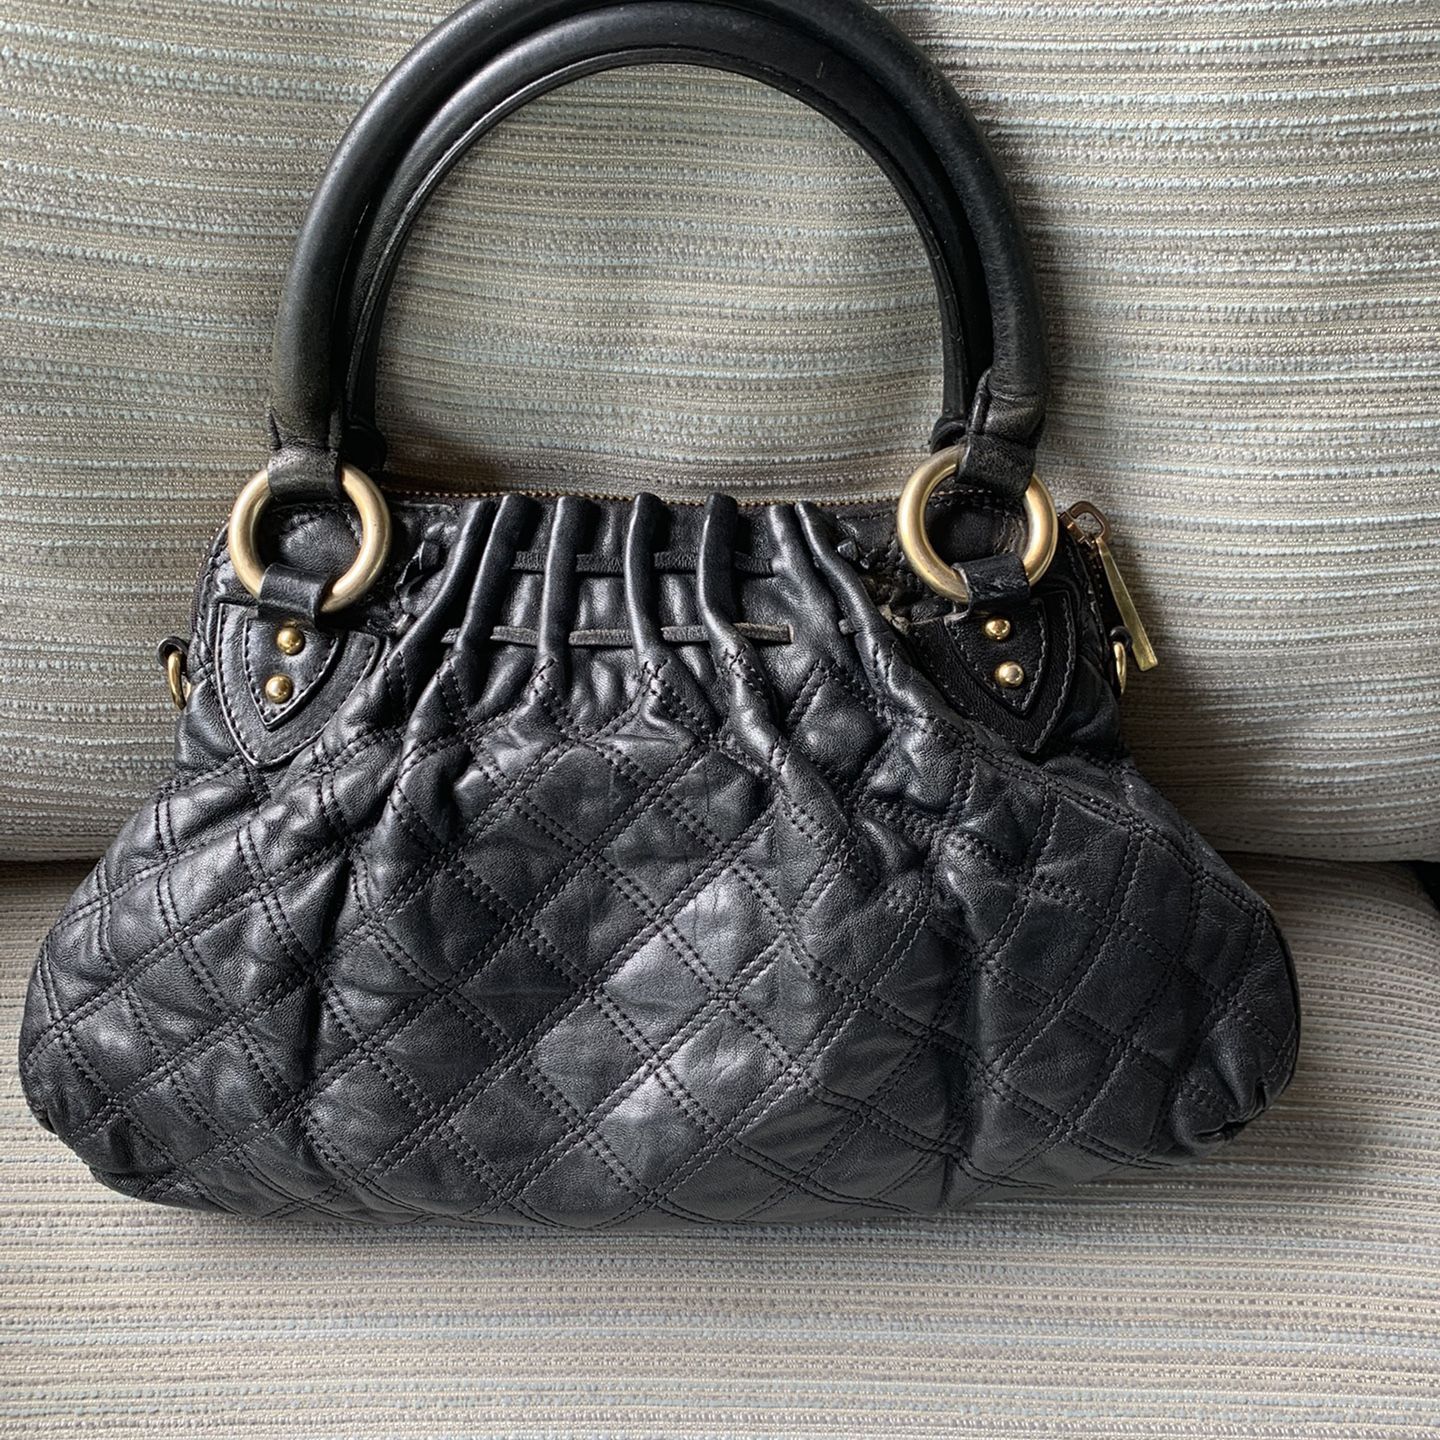 Under $1000, Authentic Used Bags & Handbags